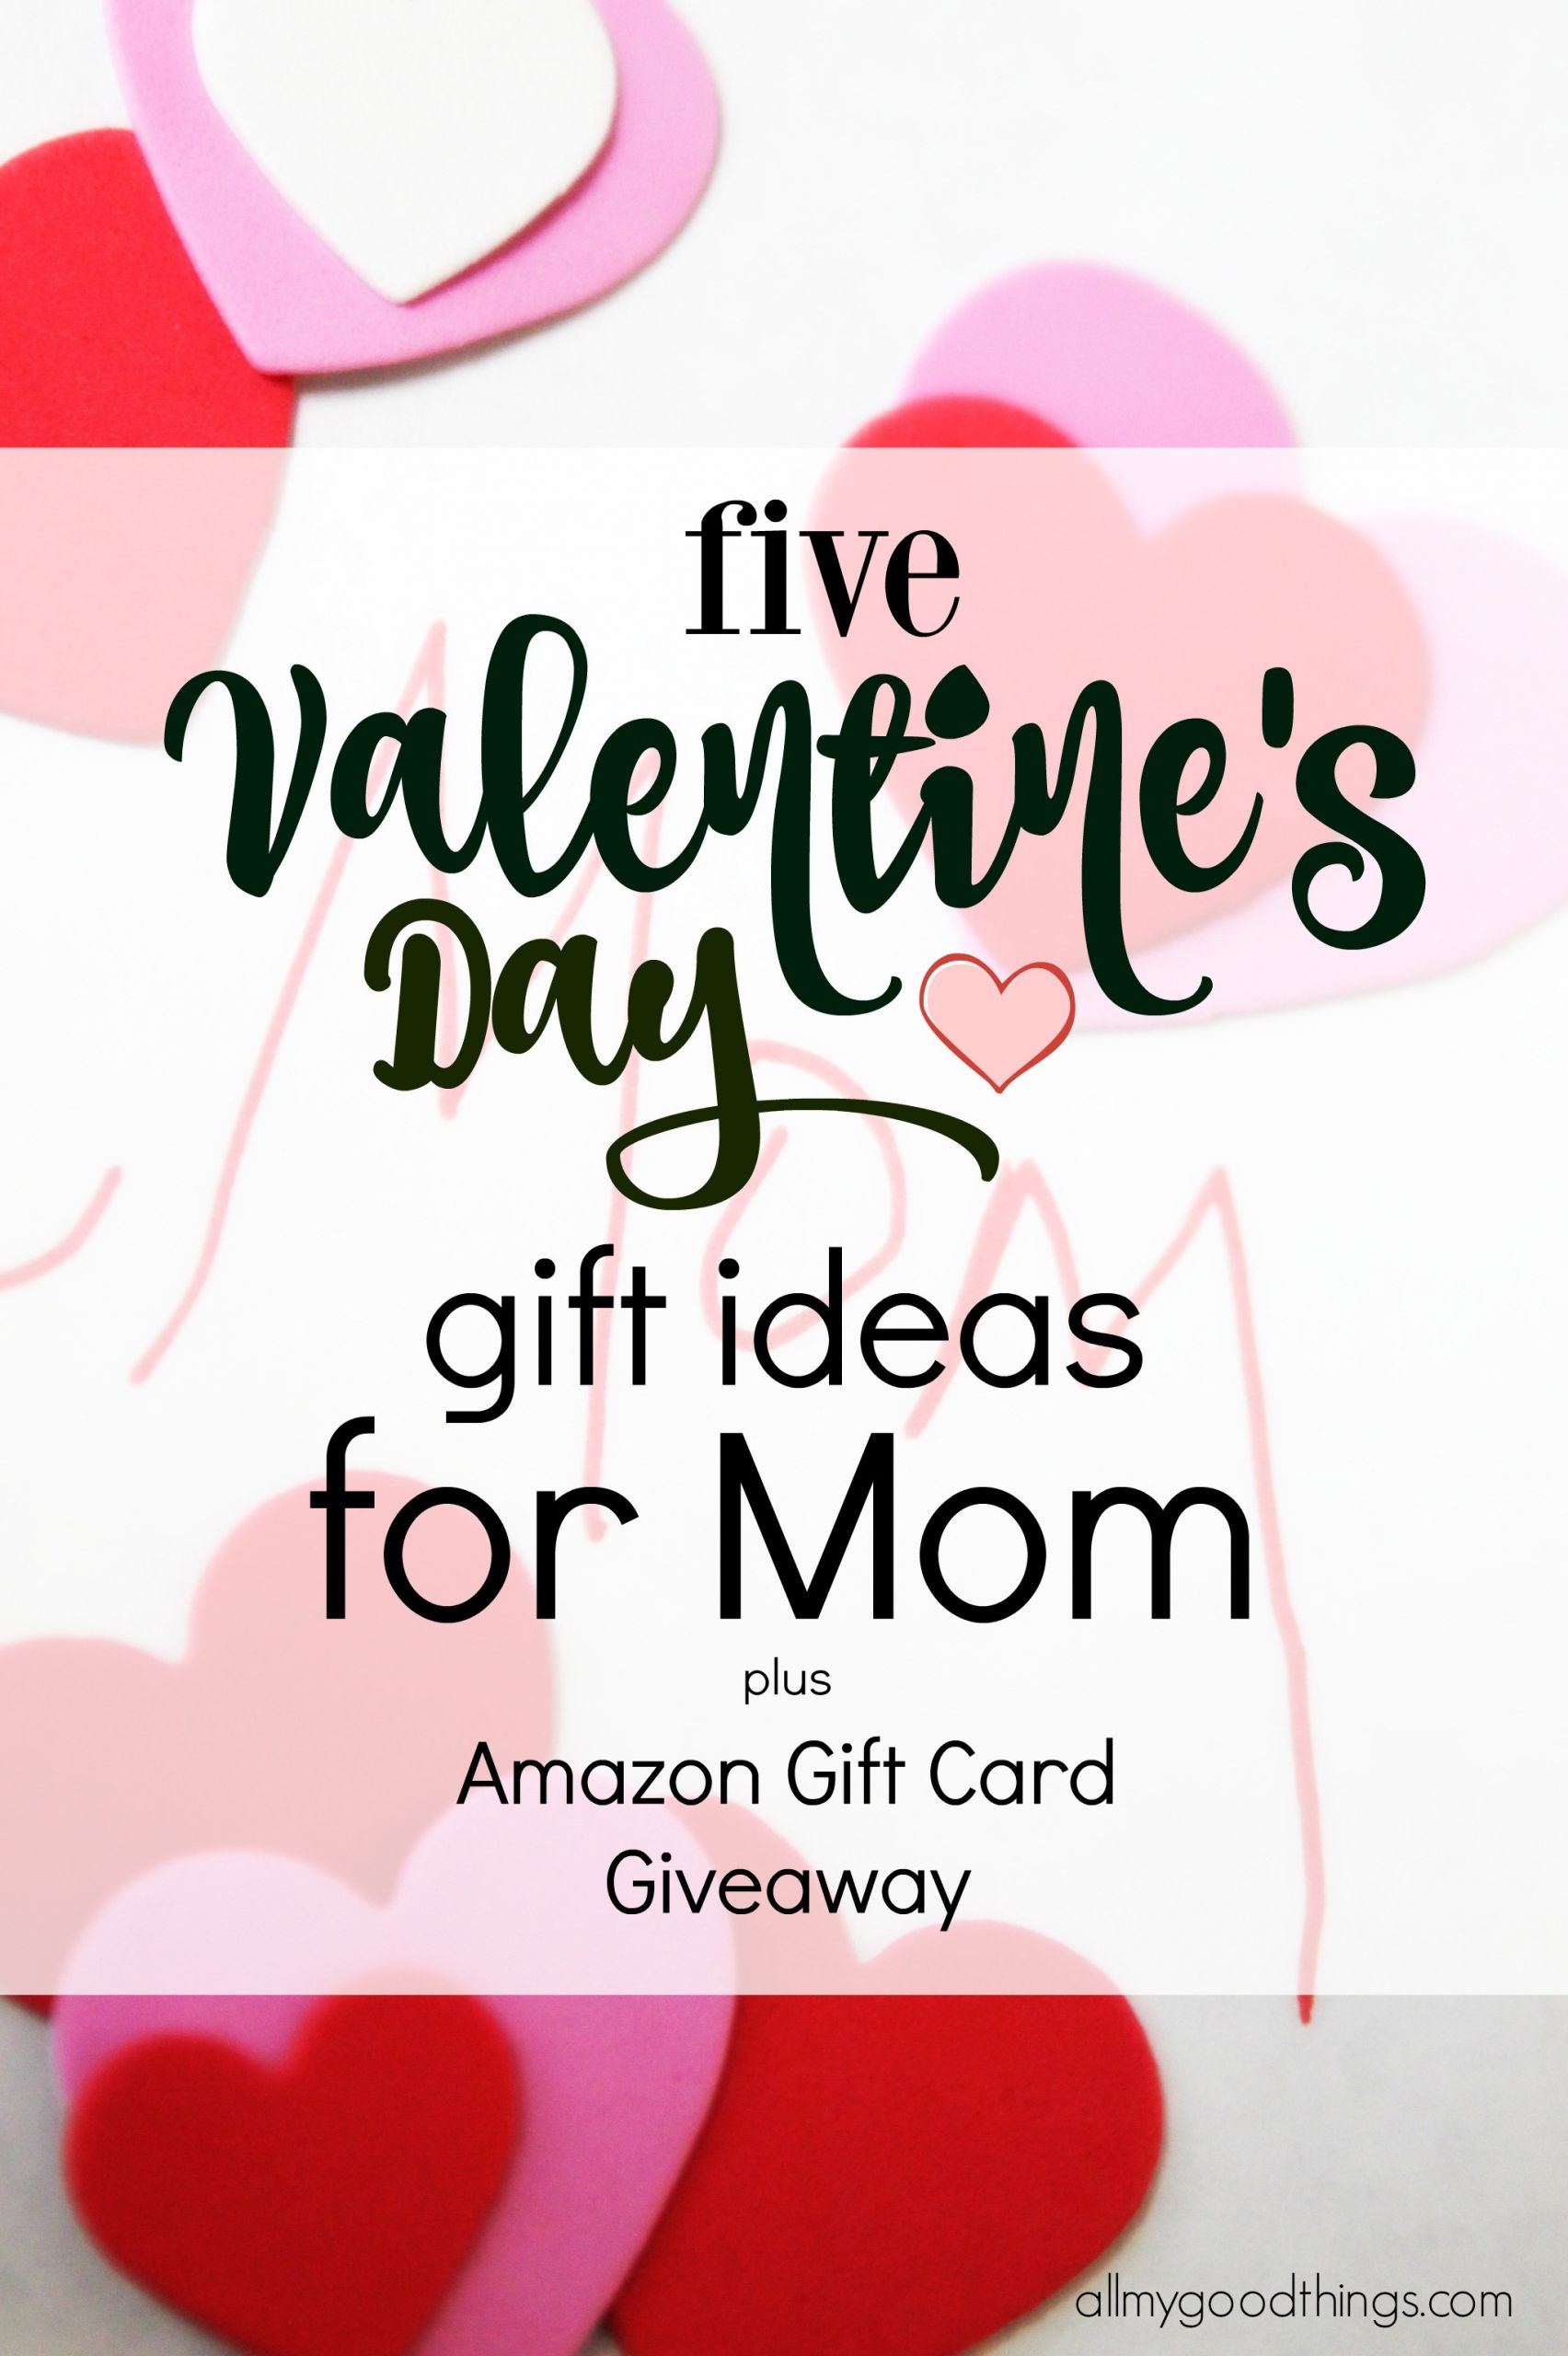 Valentines Day Gifts Amazon
 Five Valentine s Day Gift Ideas for Mom and Amazon Gift